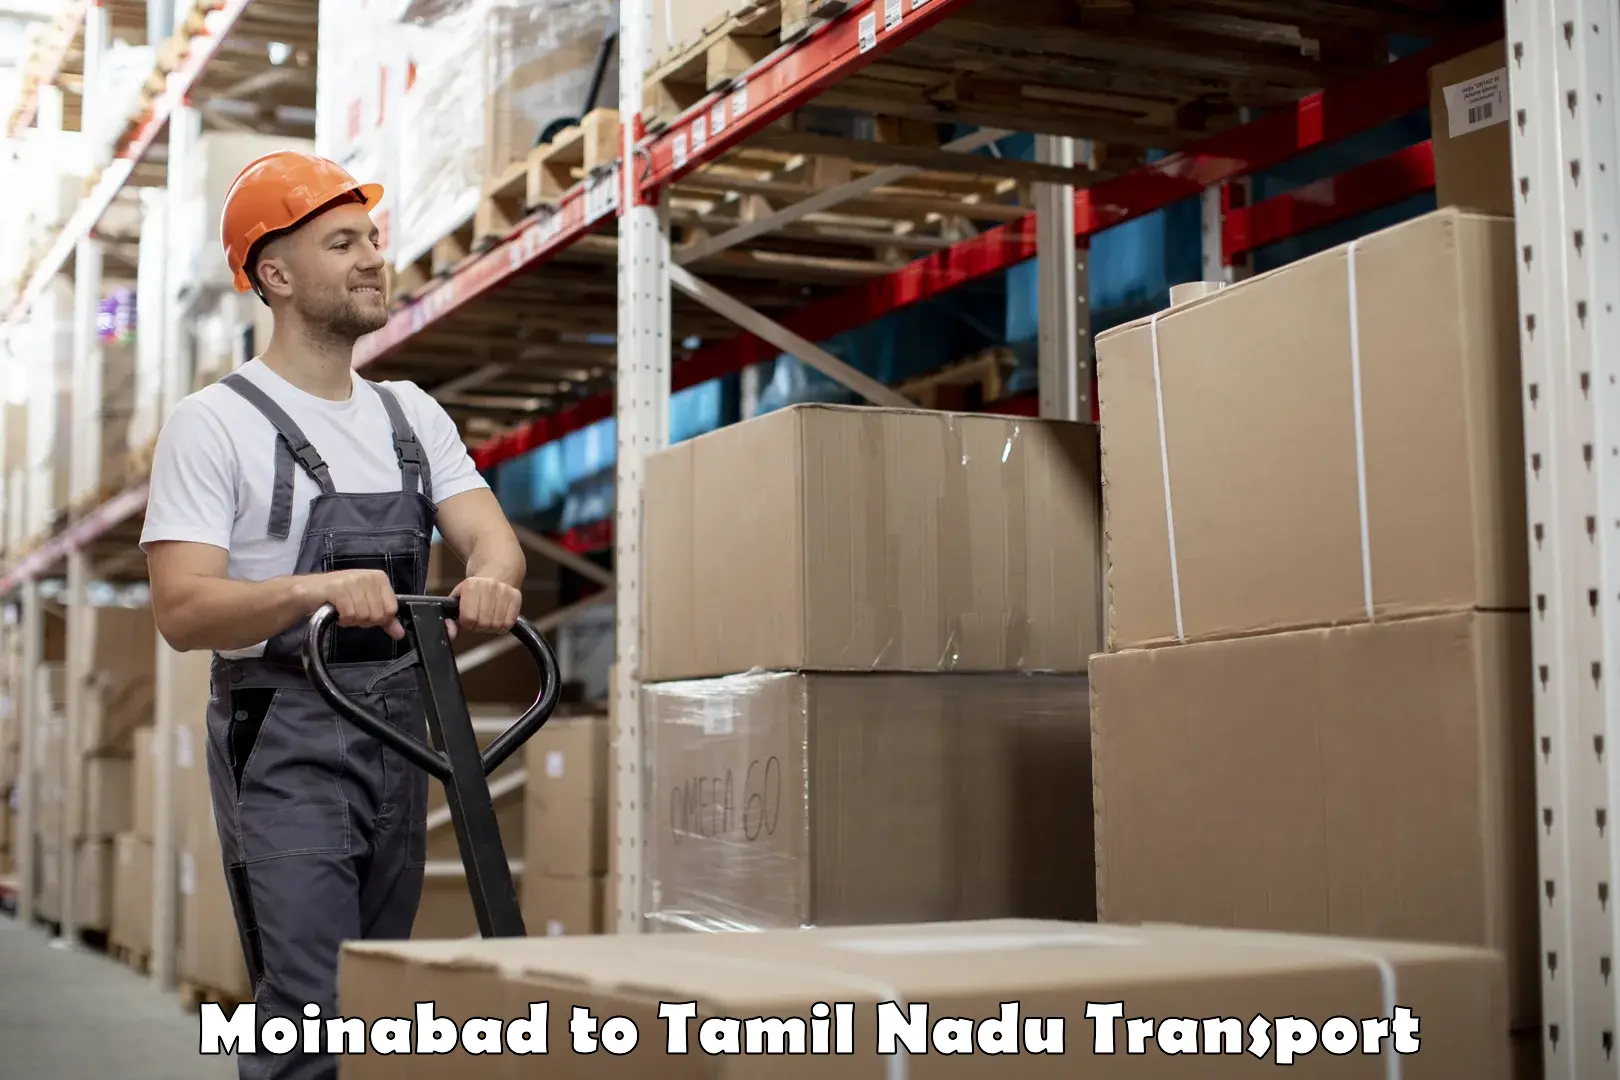 Online transport service Moinabad to Gobichettipalayam